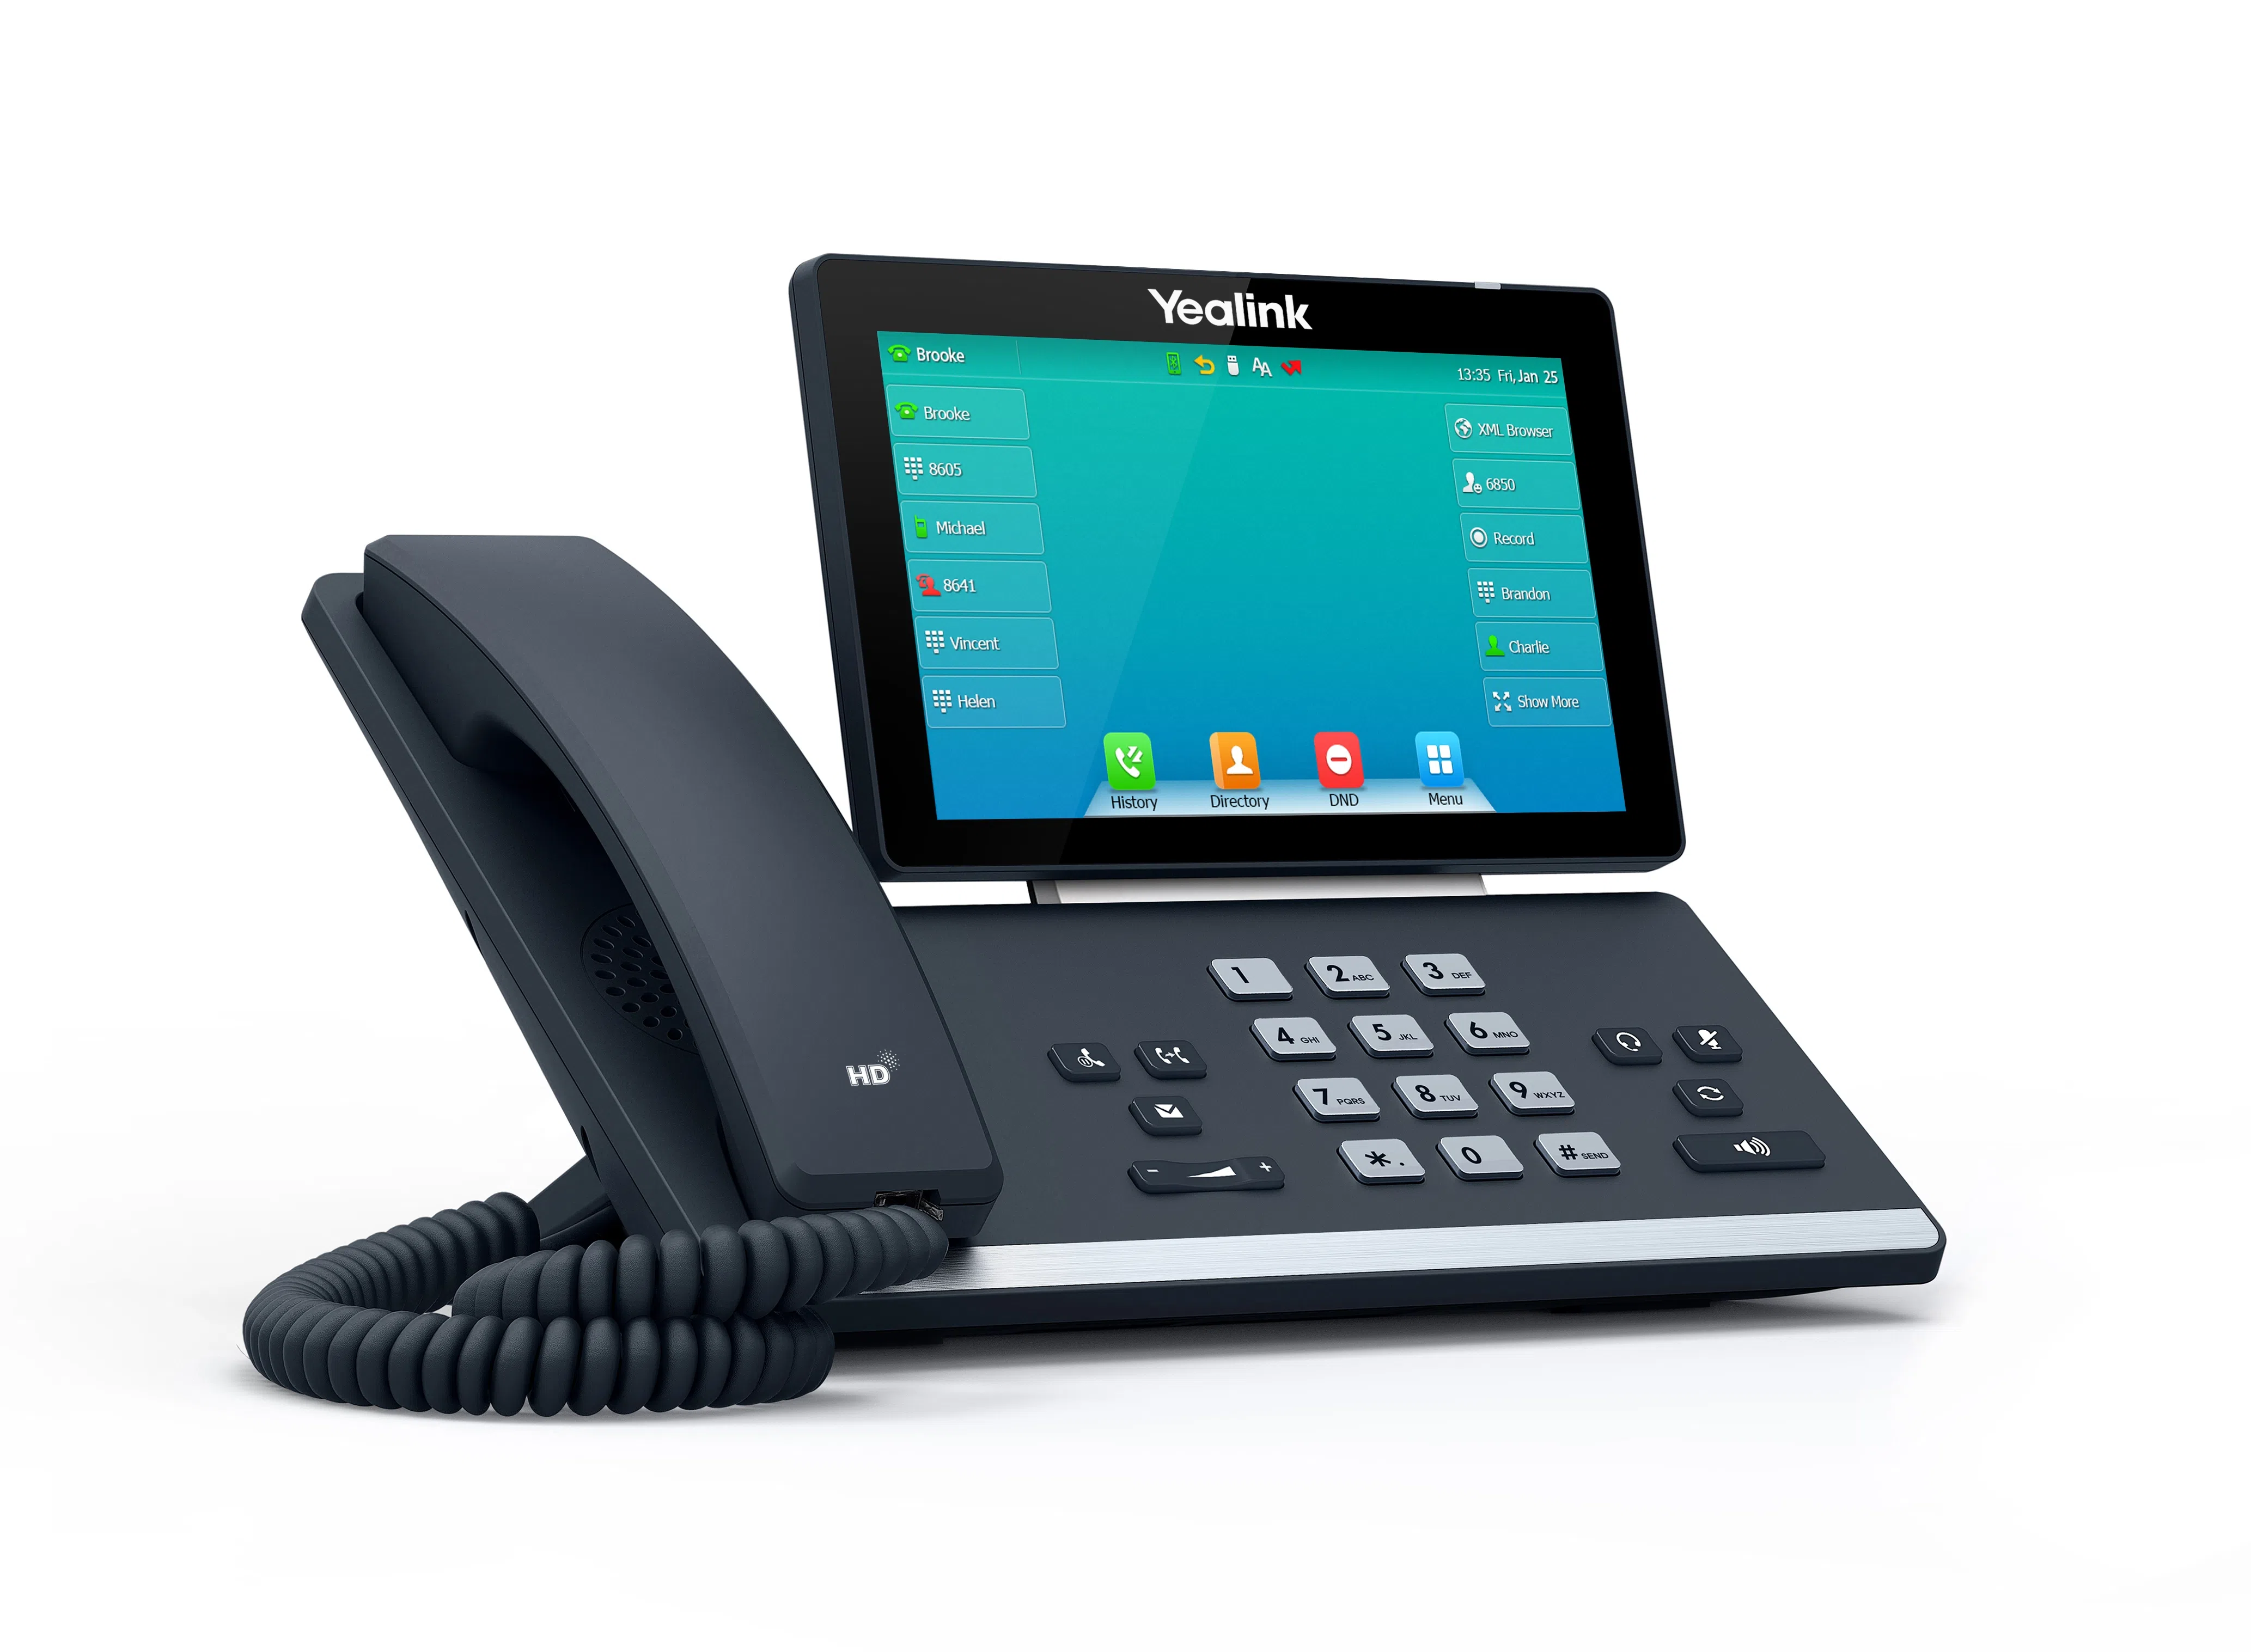 How many SIP accounts does the Yealink T57W IP Phone support?